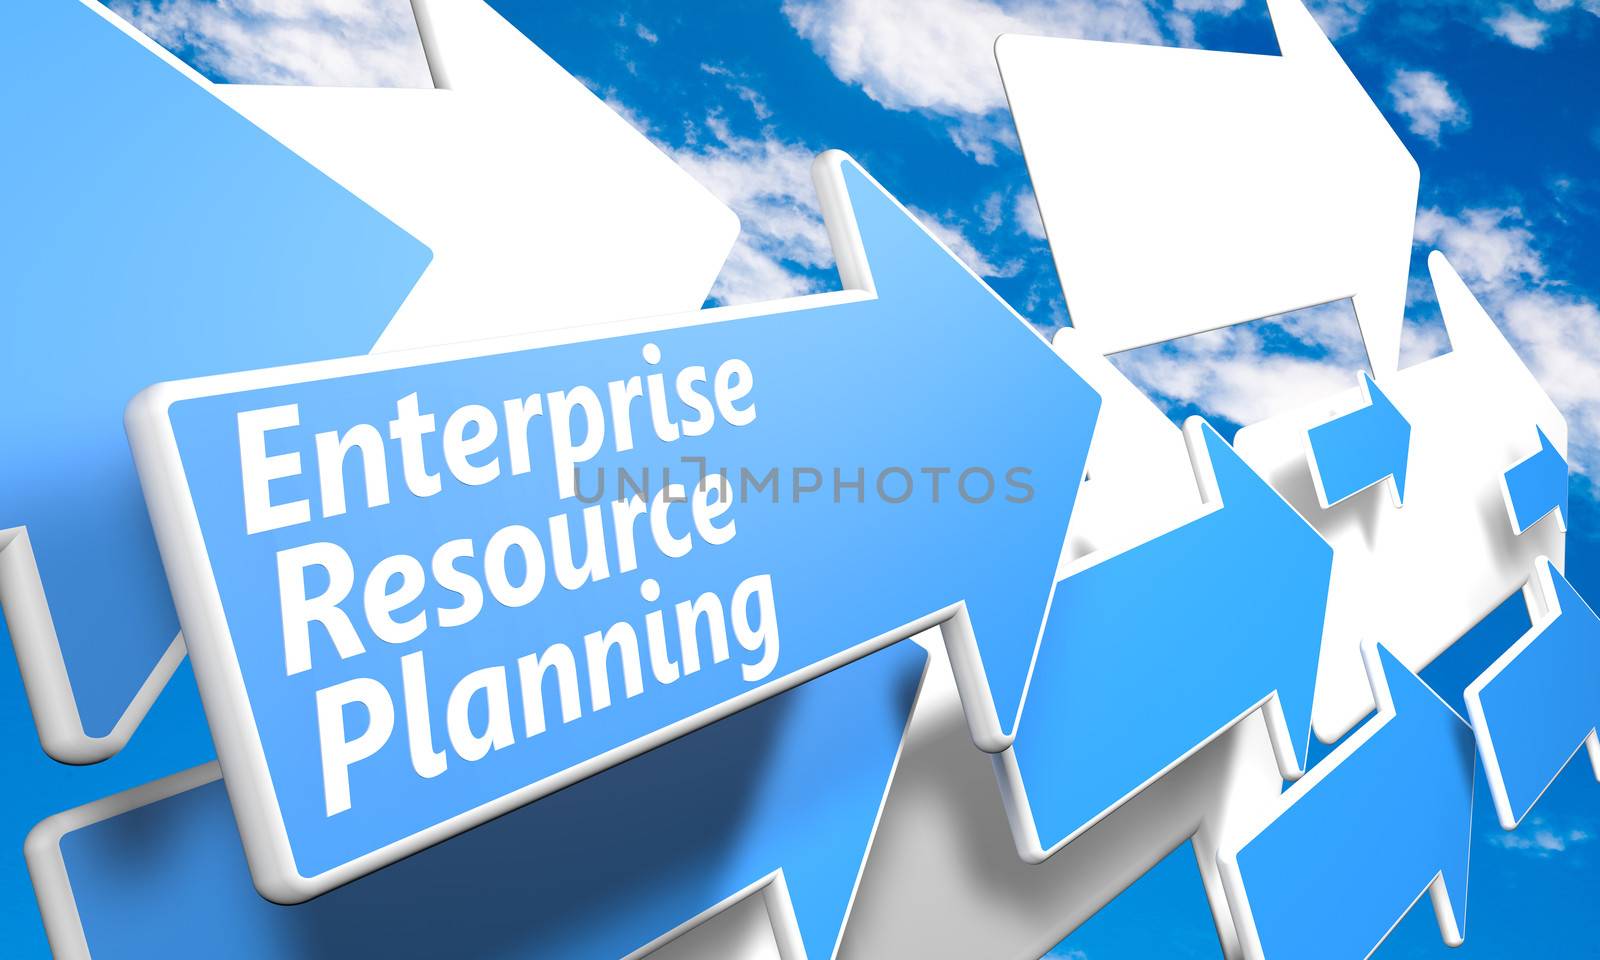 Enterprise Resource Planning 3d render concept with blue and white arrows flying in a blue sky with clouds